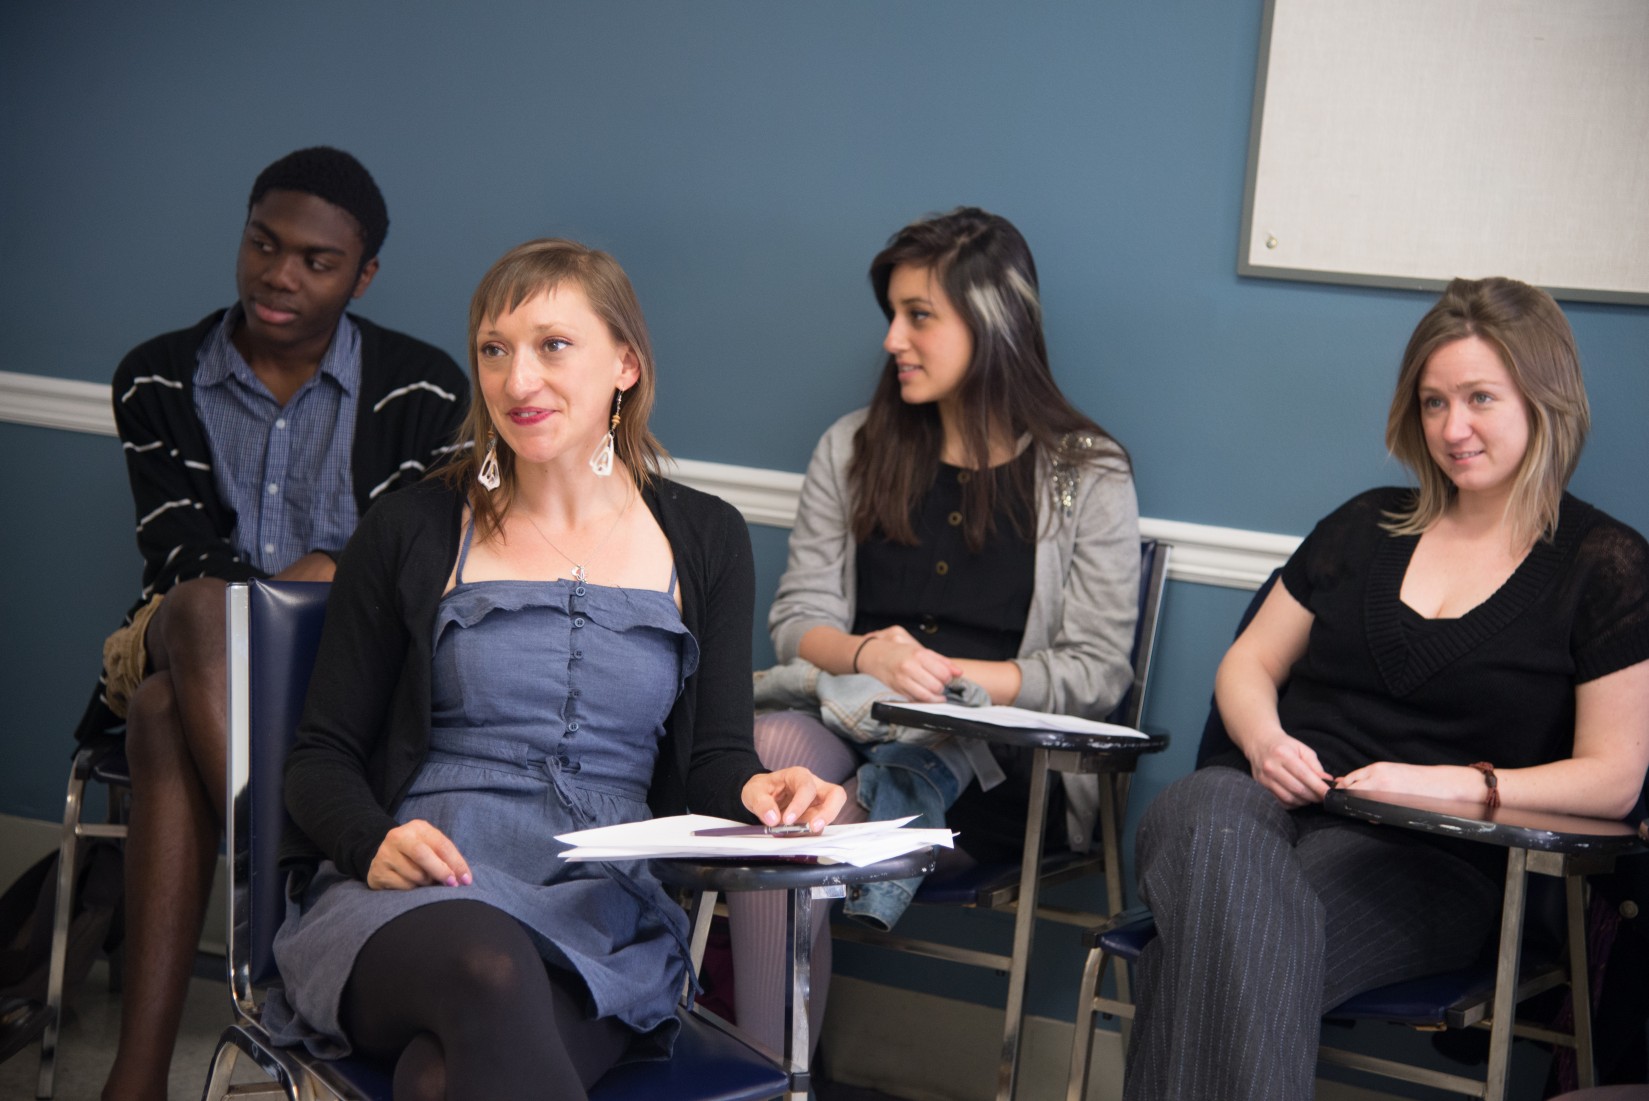 French professor Julie Huntington (foreground) and her students listen to a presentation